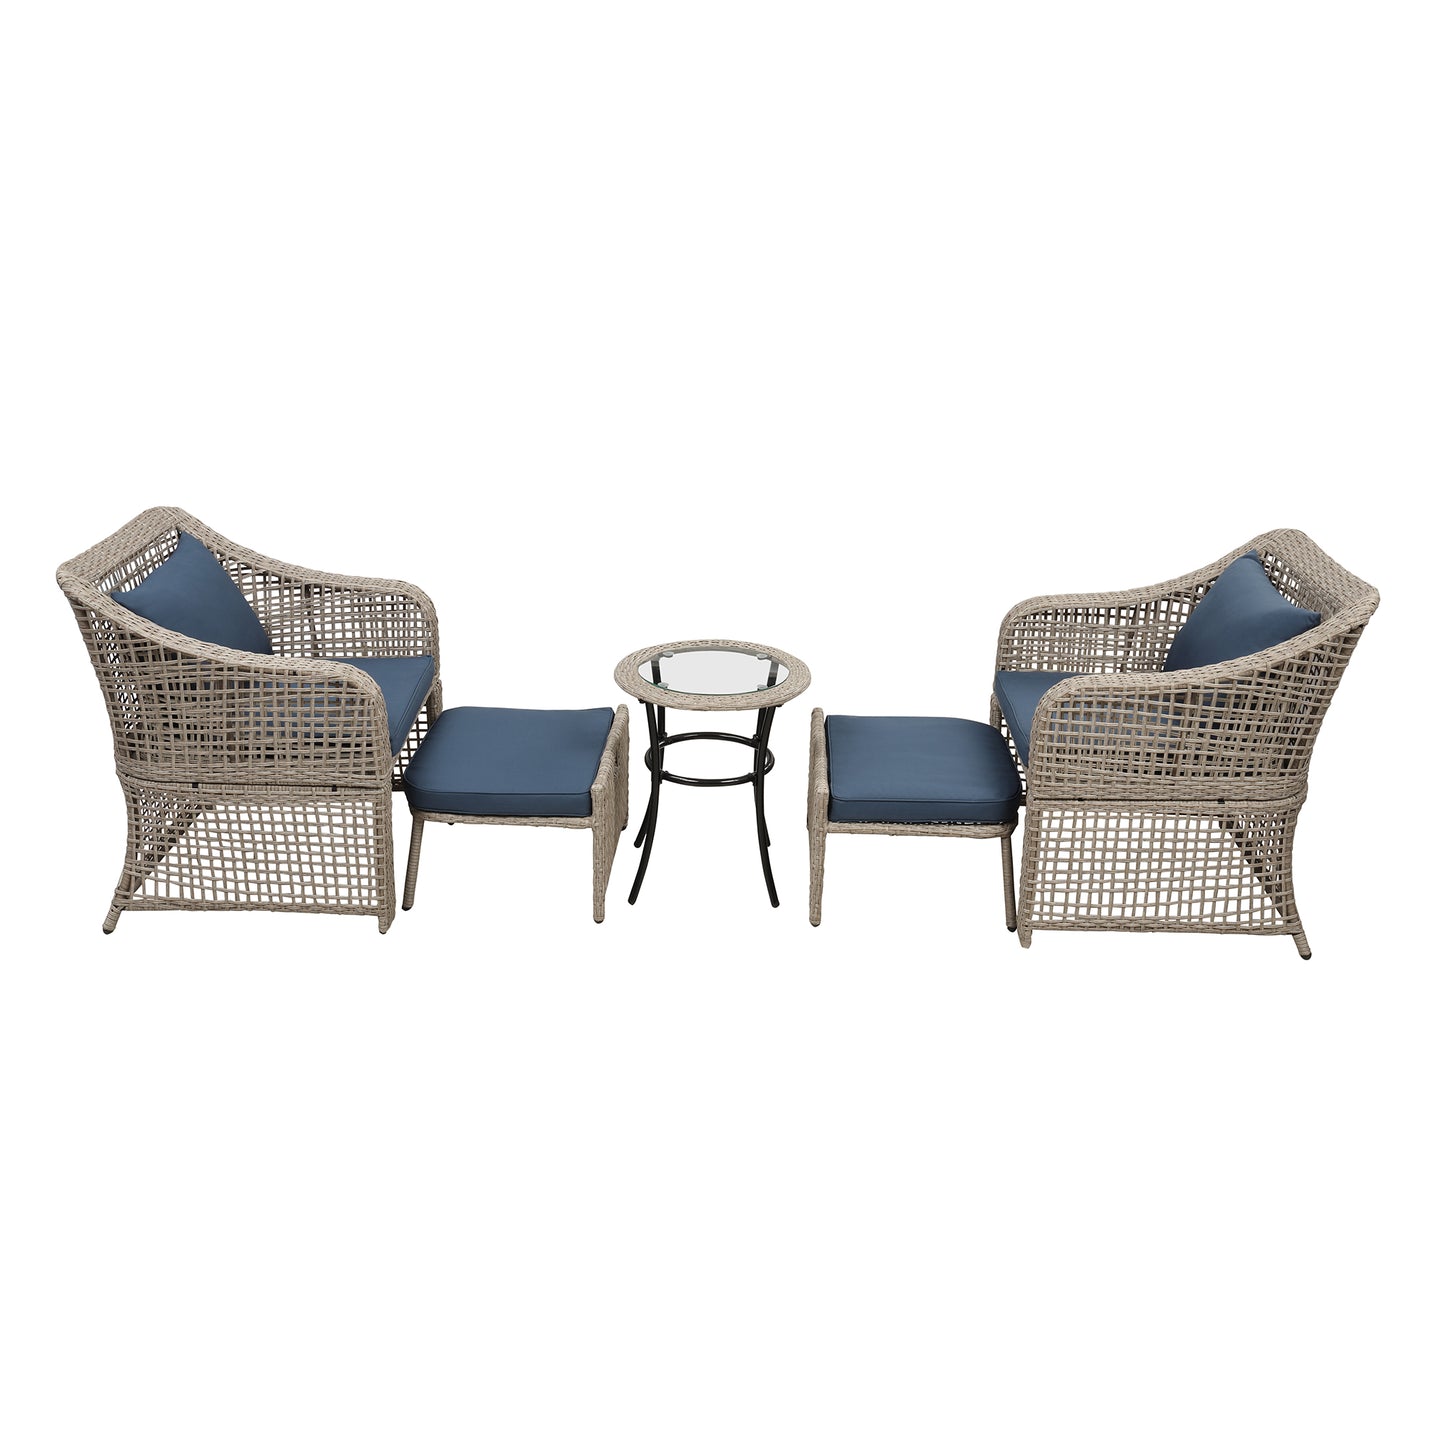 5-piece Outdoor Conversation Set Patio Furniture Set Bistro Set Rattan Wicker Chairs with Stools and Tempered Glass Table